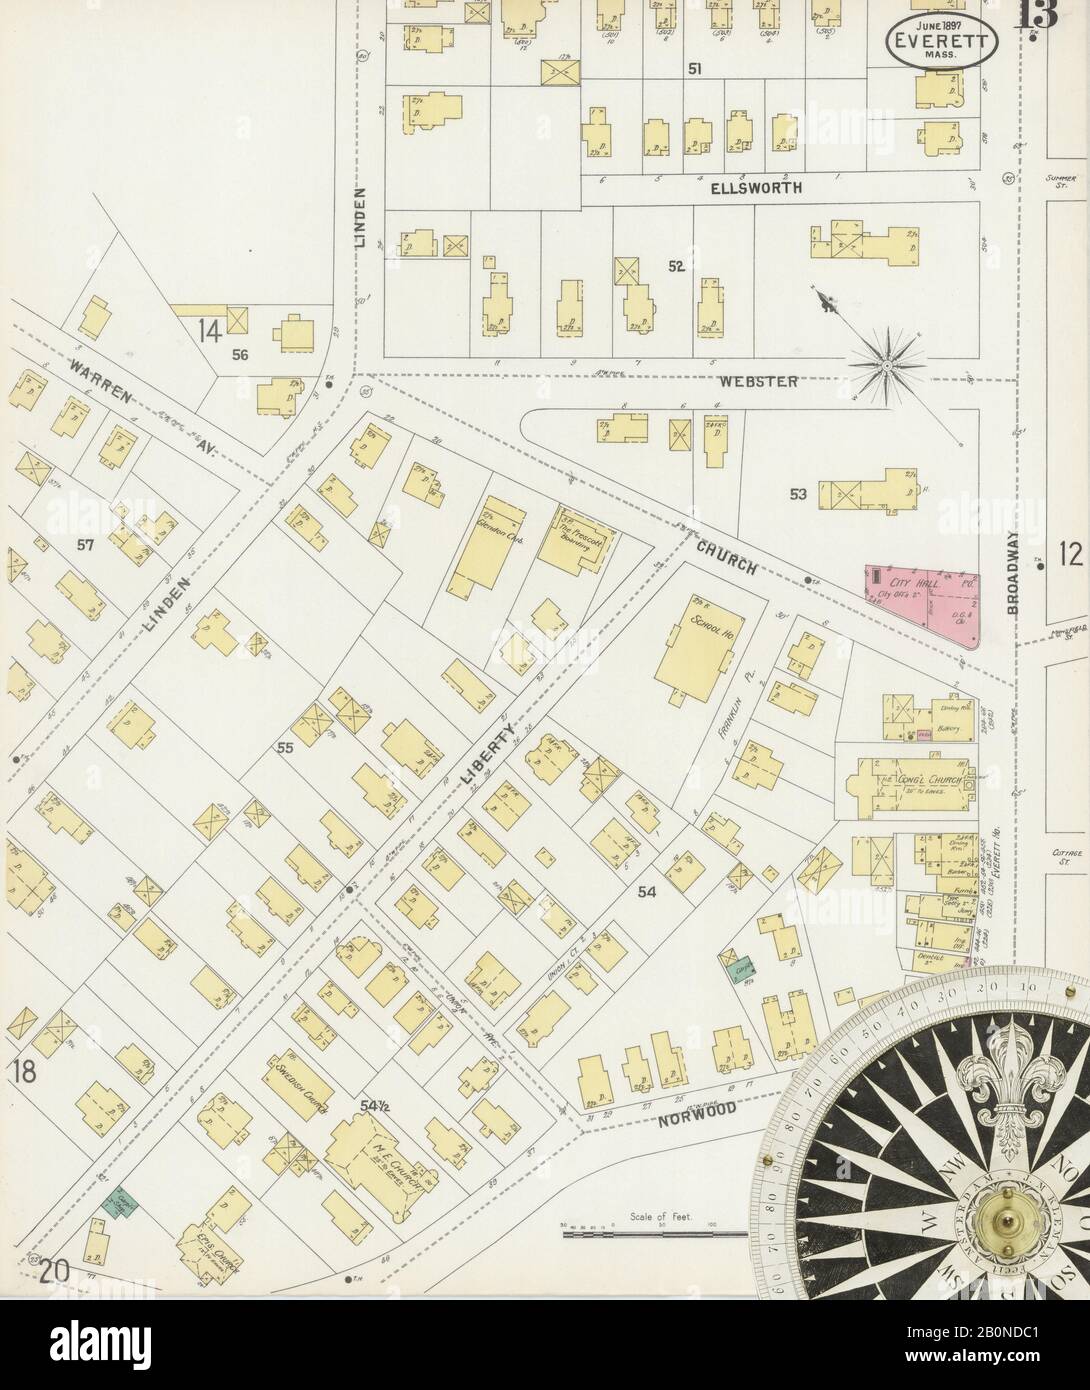 Image 13 of Sanborn Fire Insurance Map from Everett, Middlesex County, Massachusetts. Jun 1897. 27 Sheet(s), America, street map with a Nineteenth Century compass Stock Photo